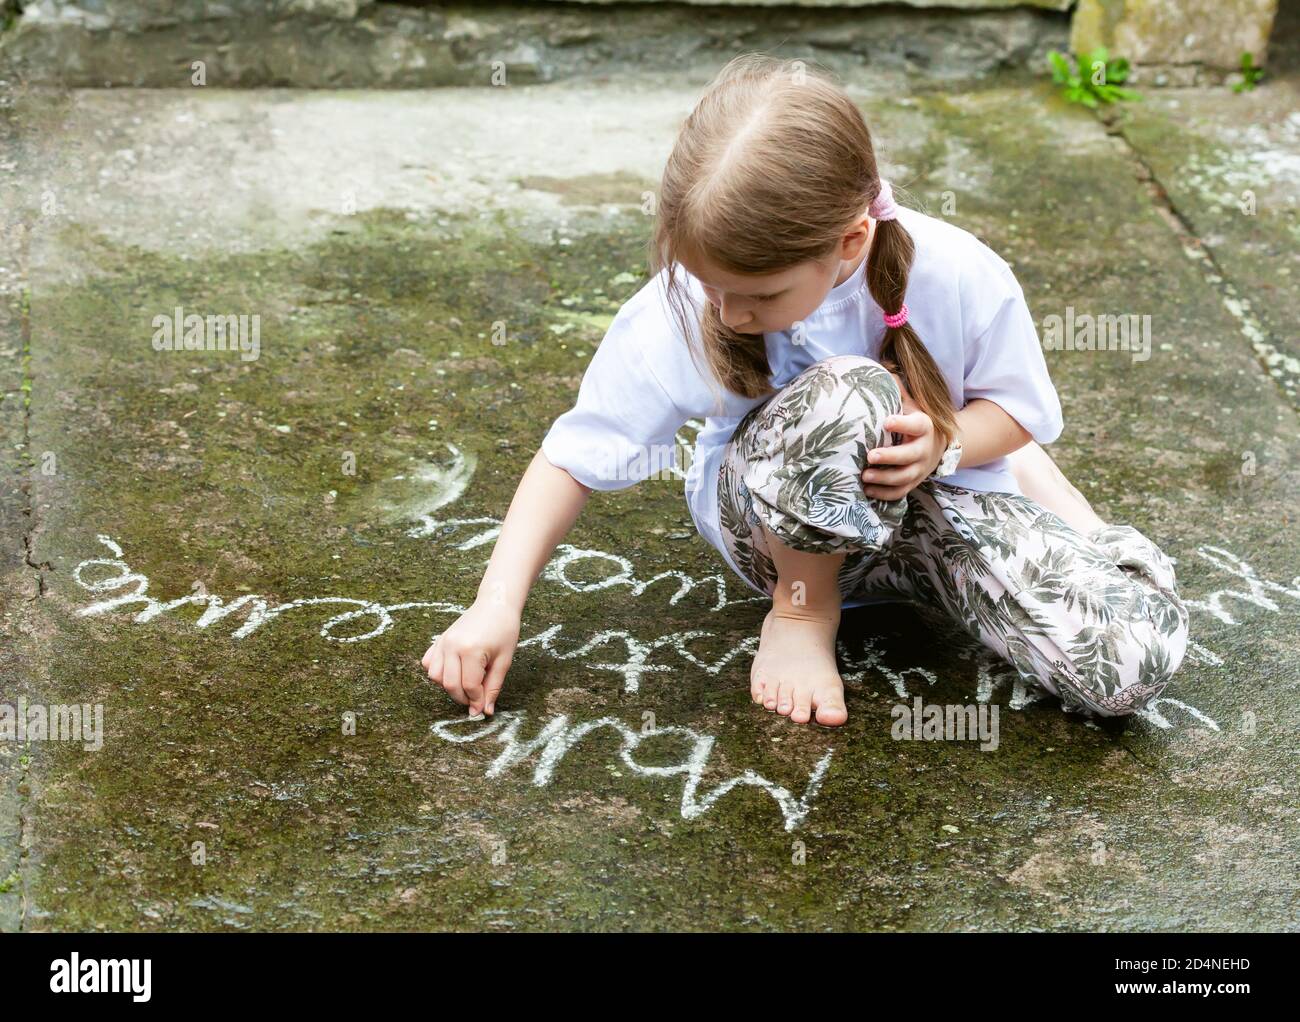 Small young girl writing simple words on concrete with white chalk. Child drawing with chalk on the ground outdoors. Art therapy concept. School kid Stock Photo